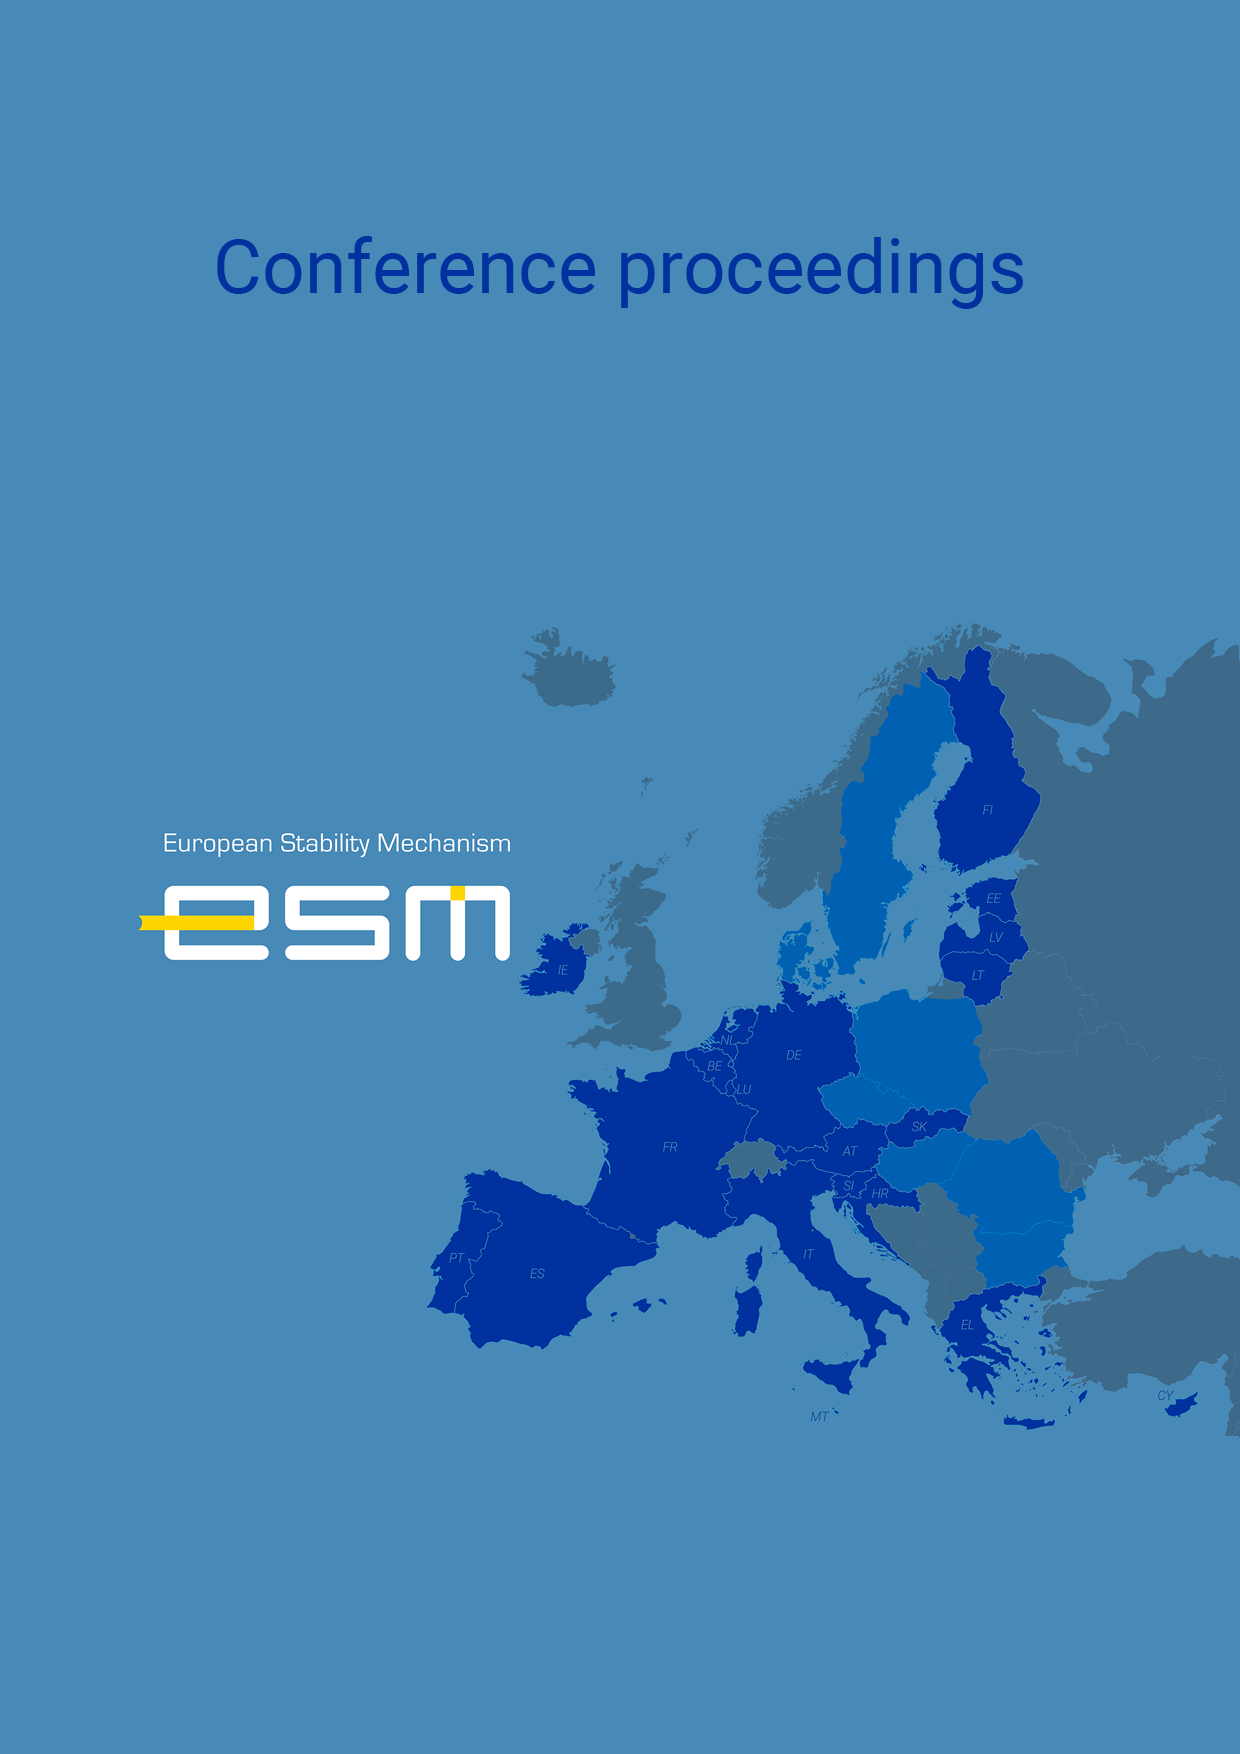 conference-proceedings-a4-v2